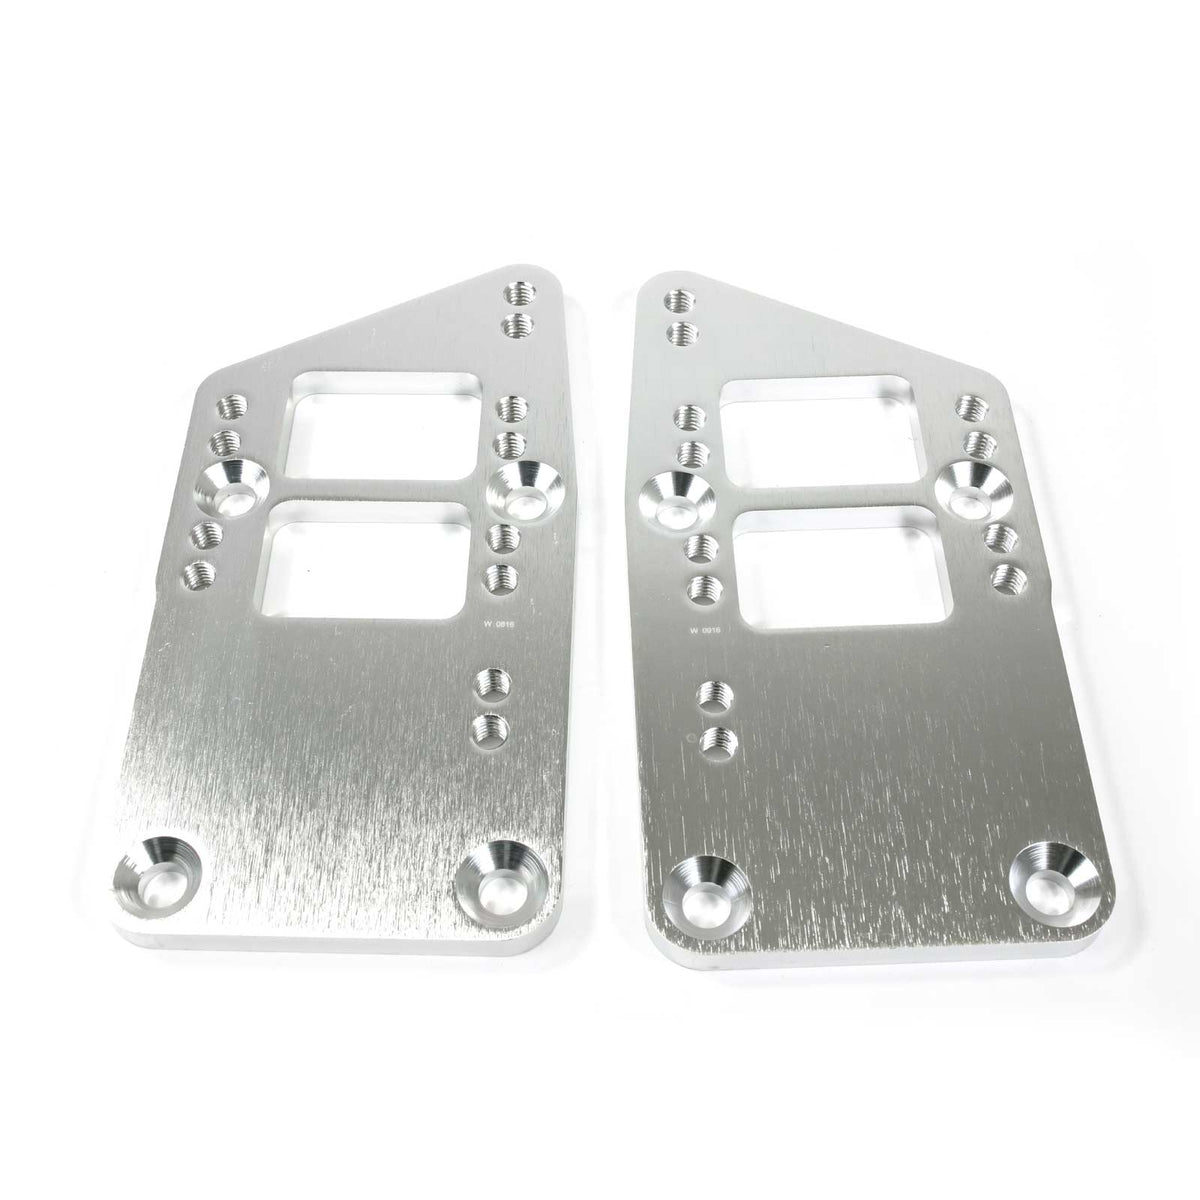 Accessories, GM LS to Small Block/Big Block Chevy Motor Mount Adapter Plates